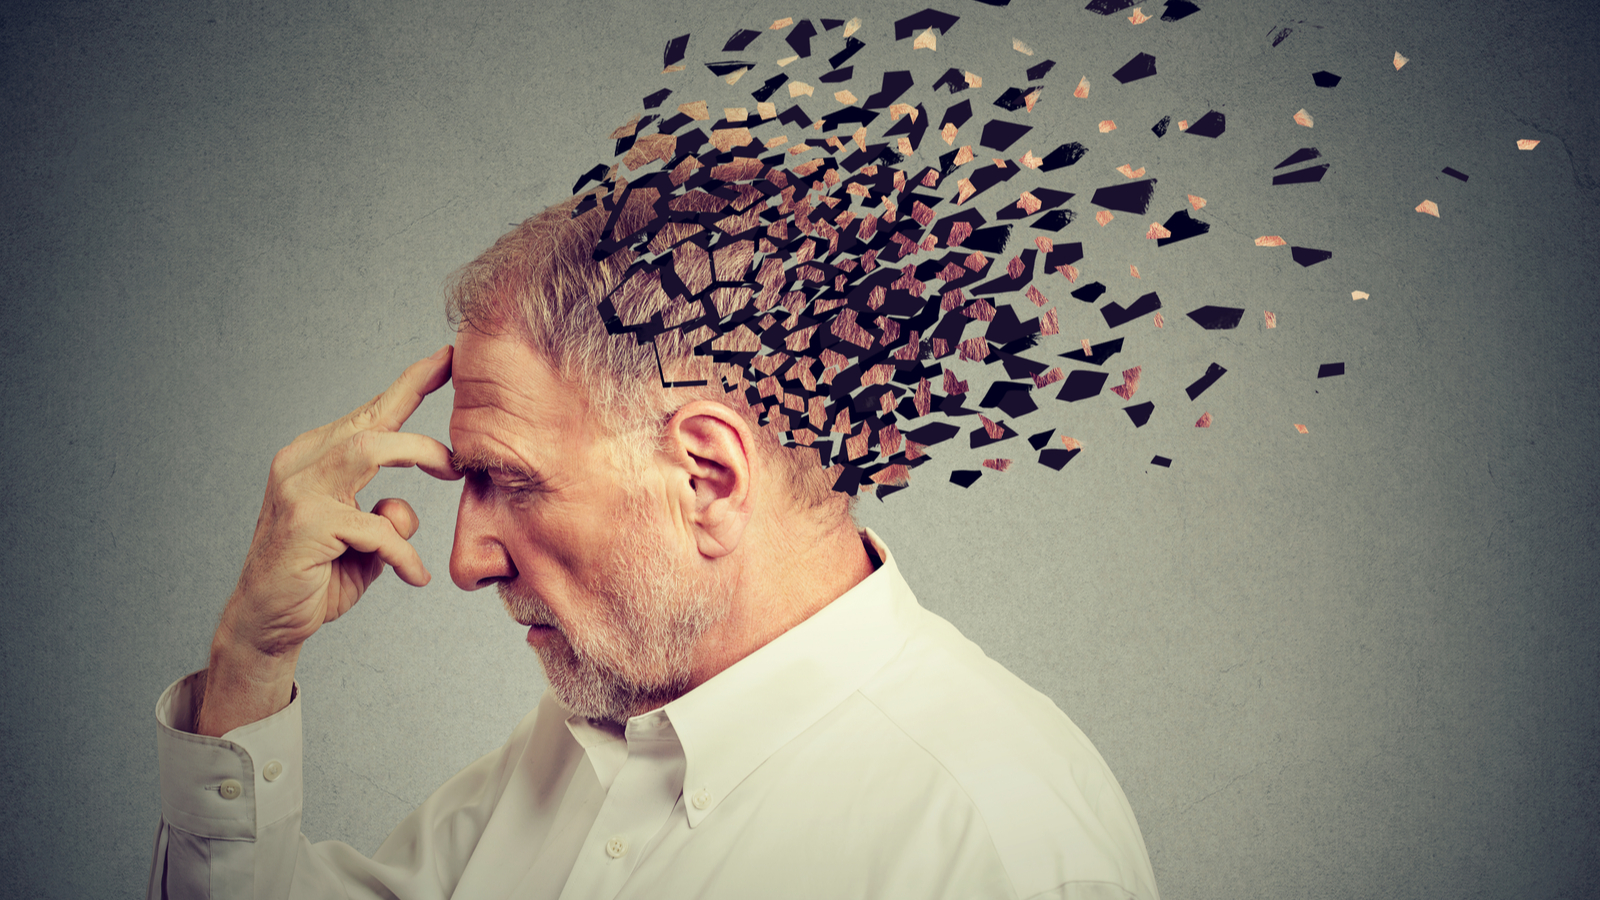 alzheimers stock image representing ANVS stock